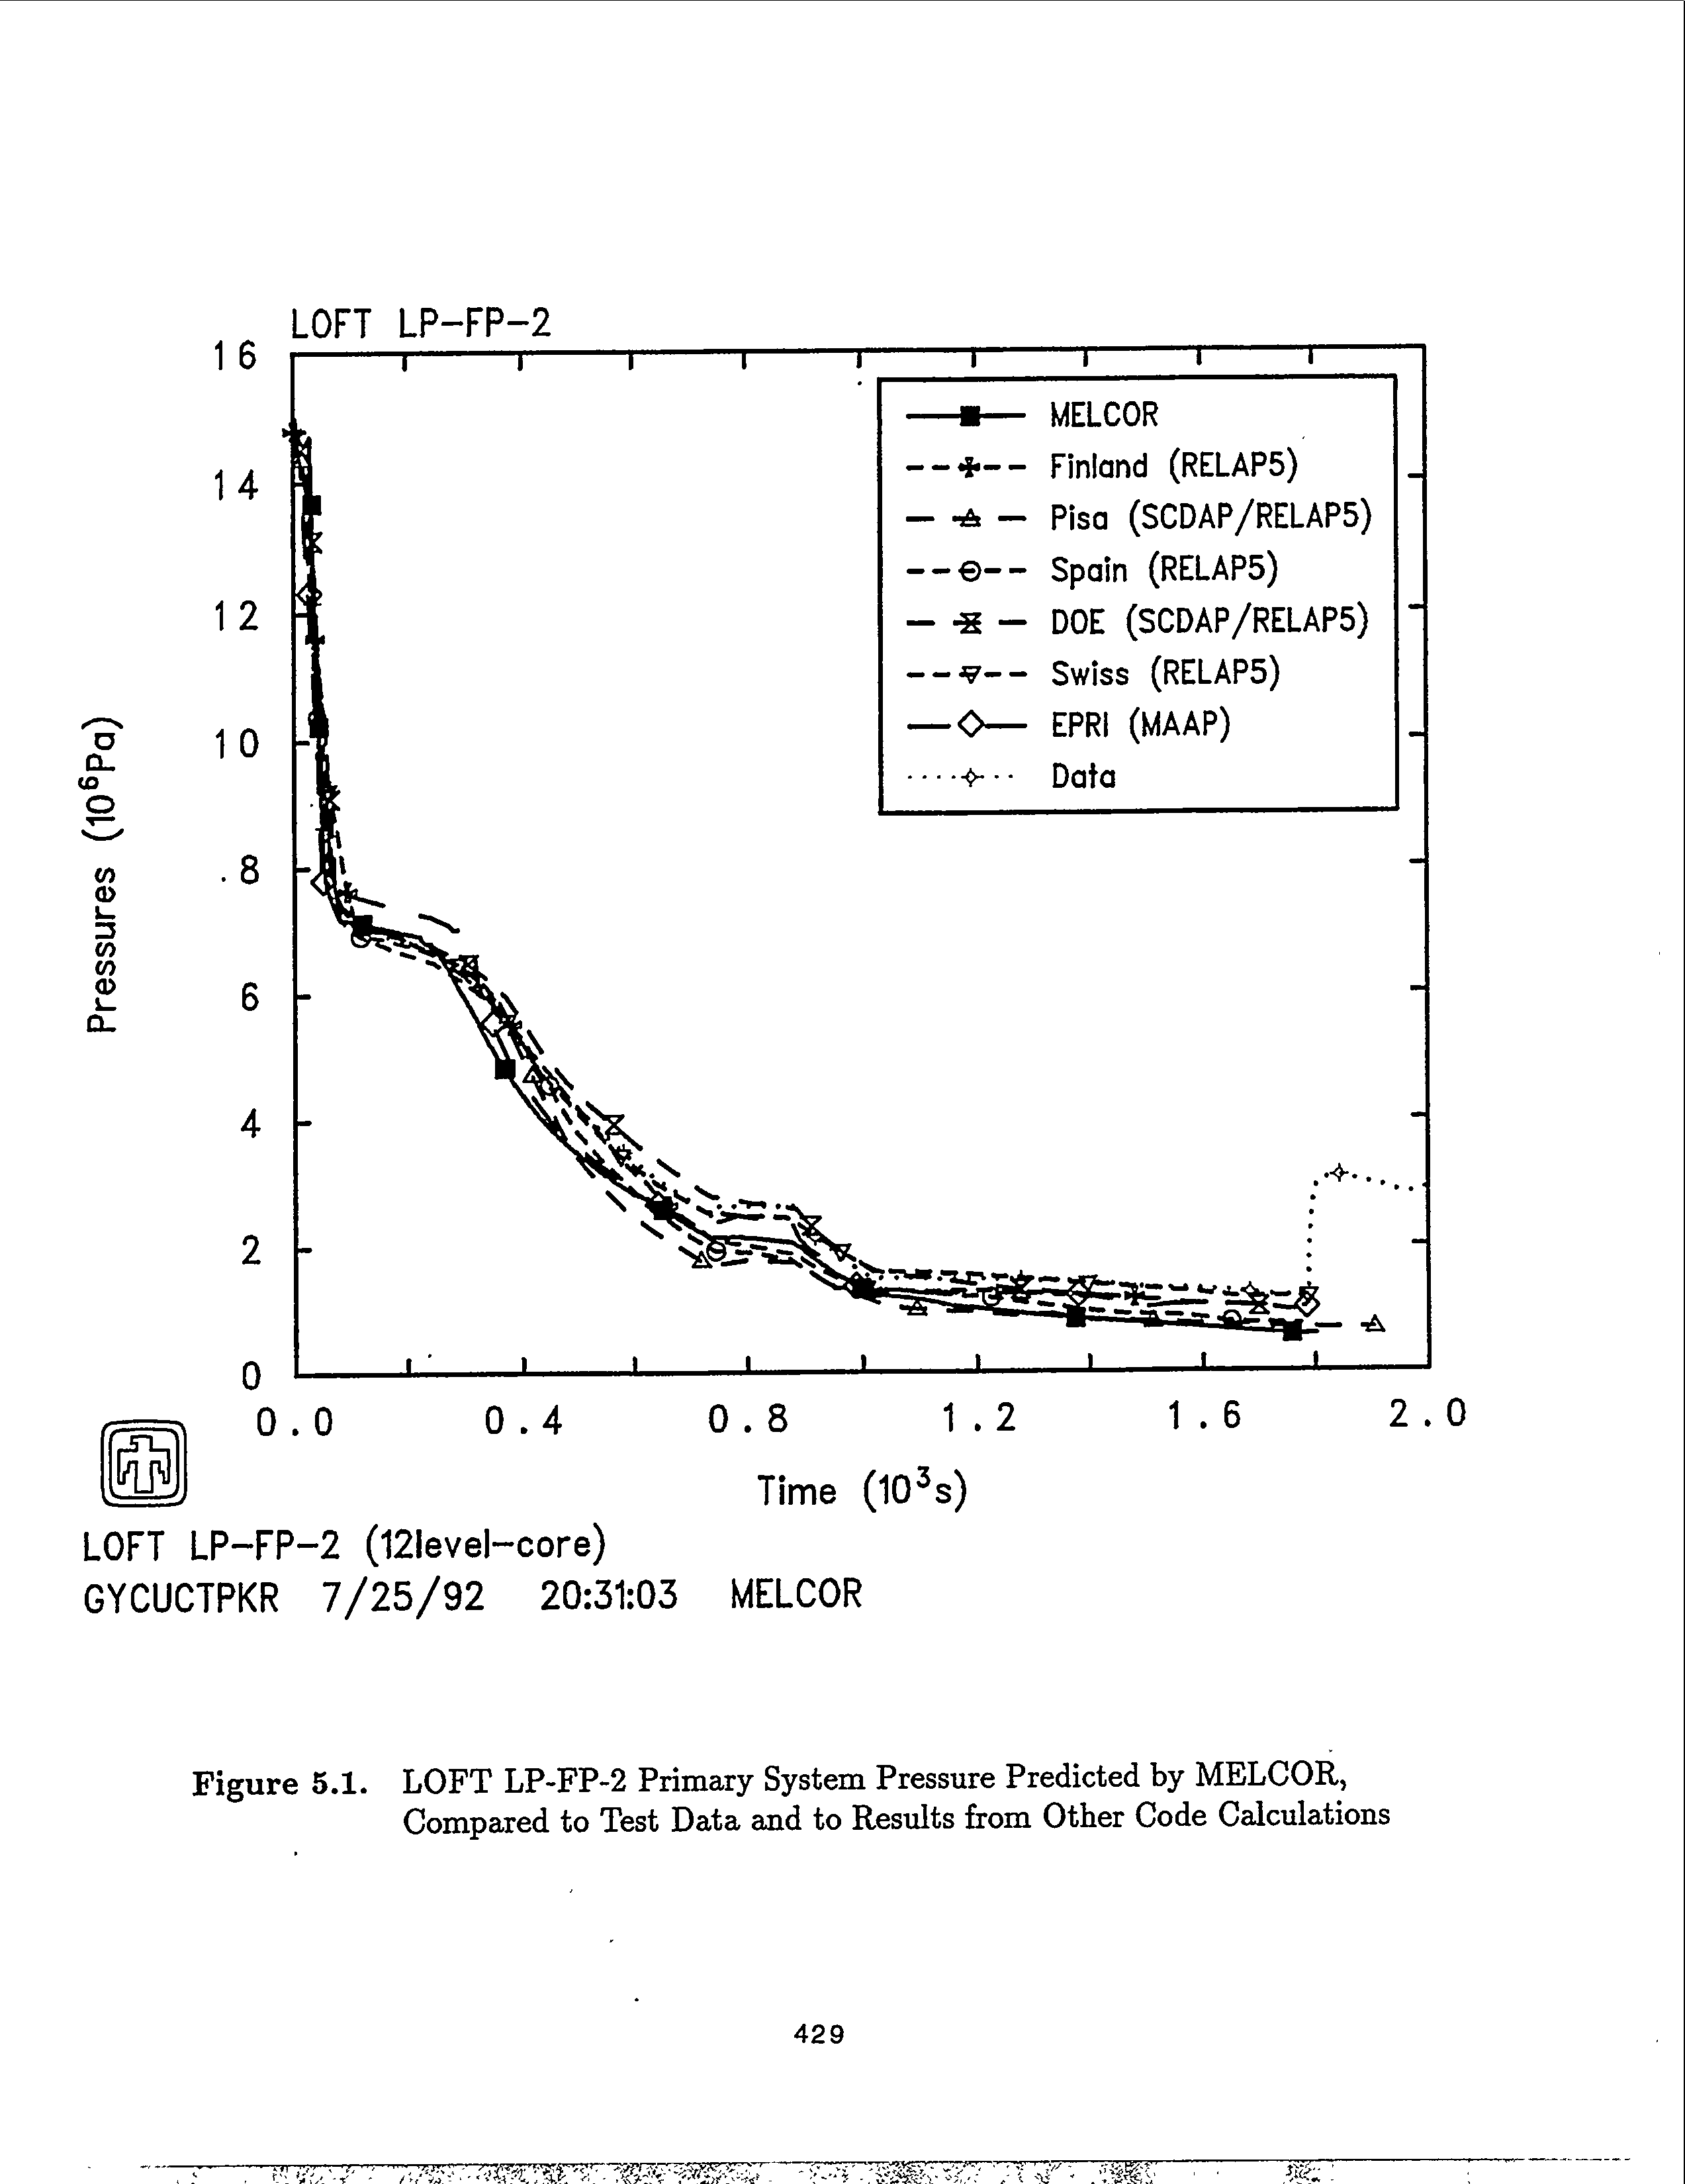 Figure 5.1. LOFT LP-FP-2 Primary System Pressure Predicted by MELCOR,...